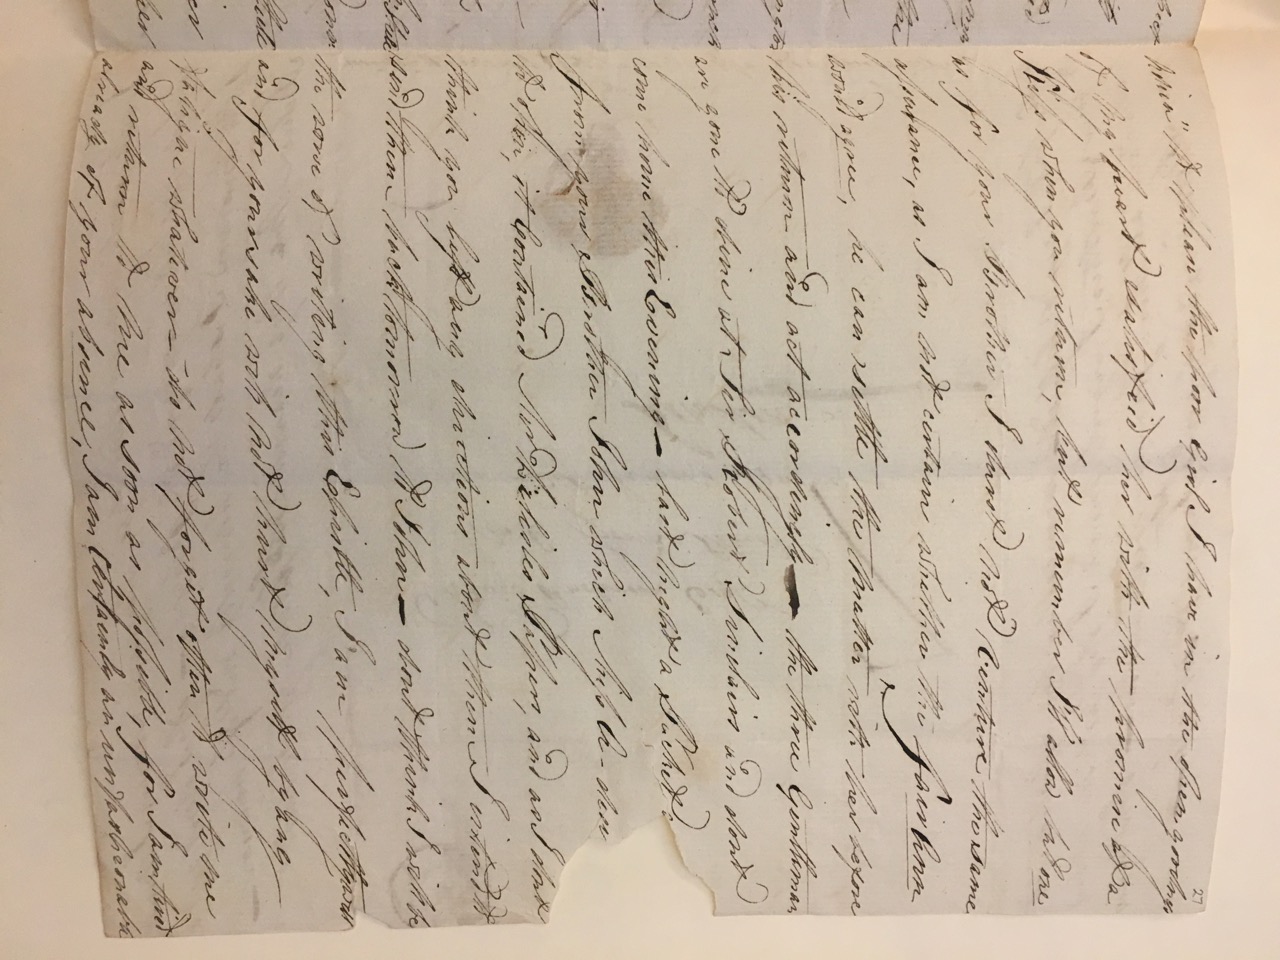 Image #3 of letter: Christina Anderson to David Anderson, 17 May 1789